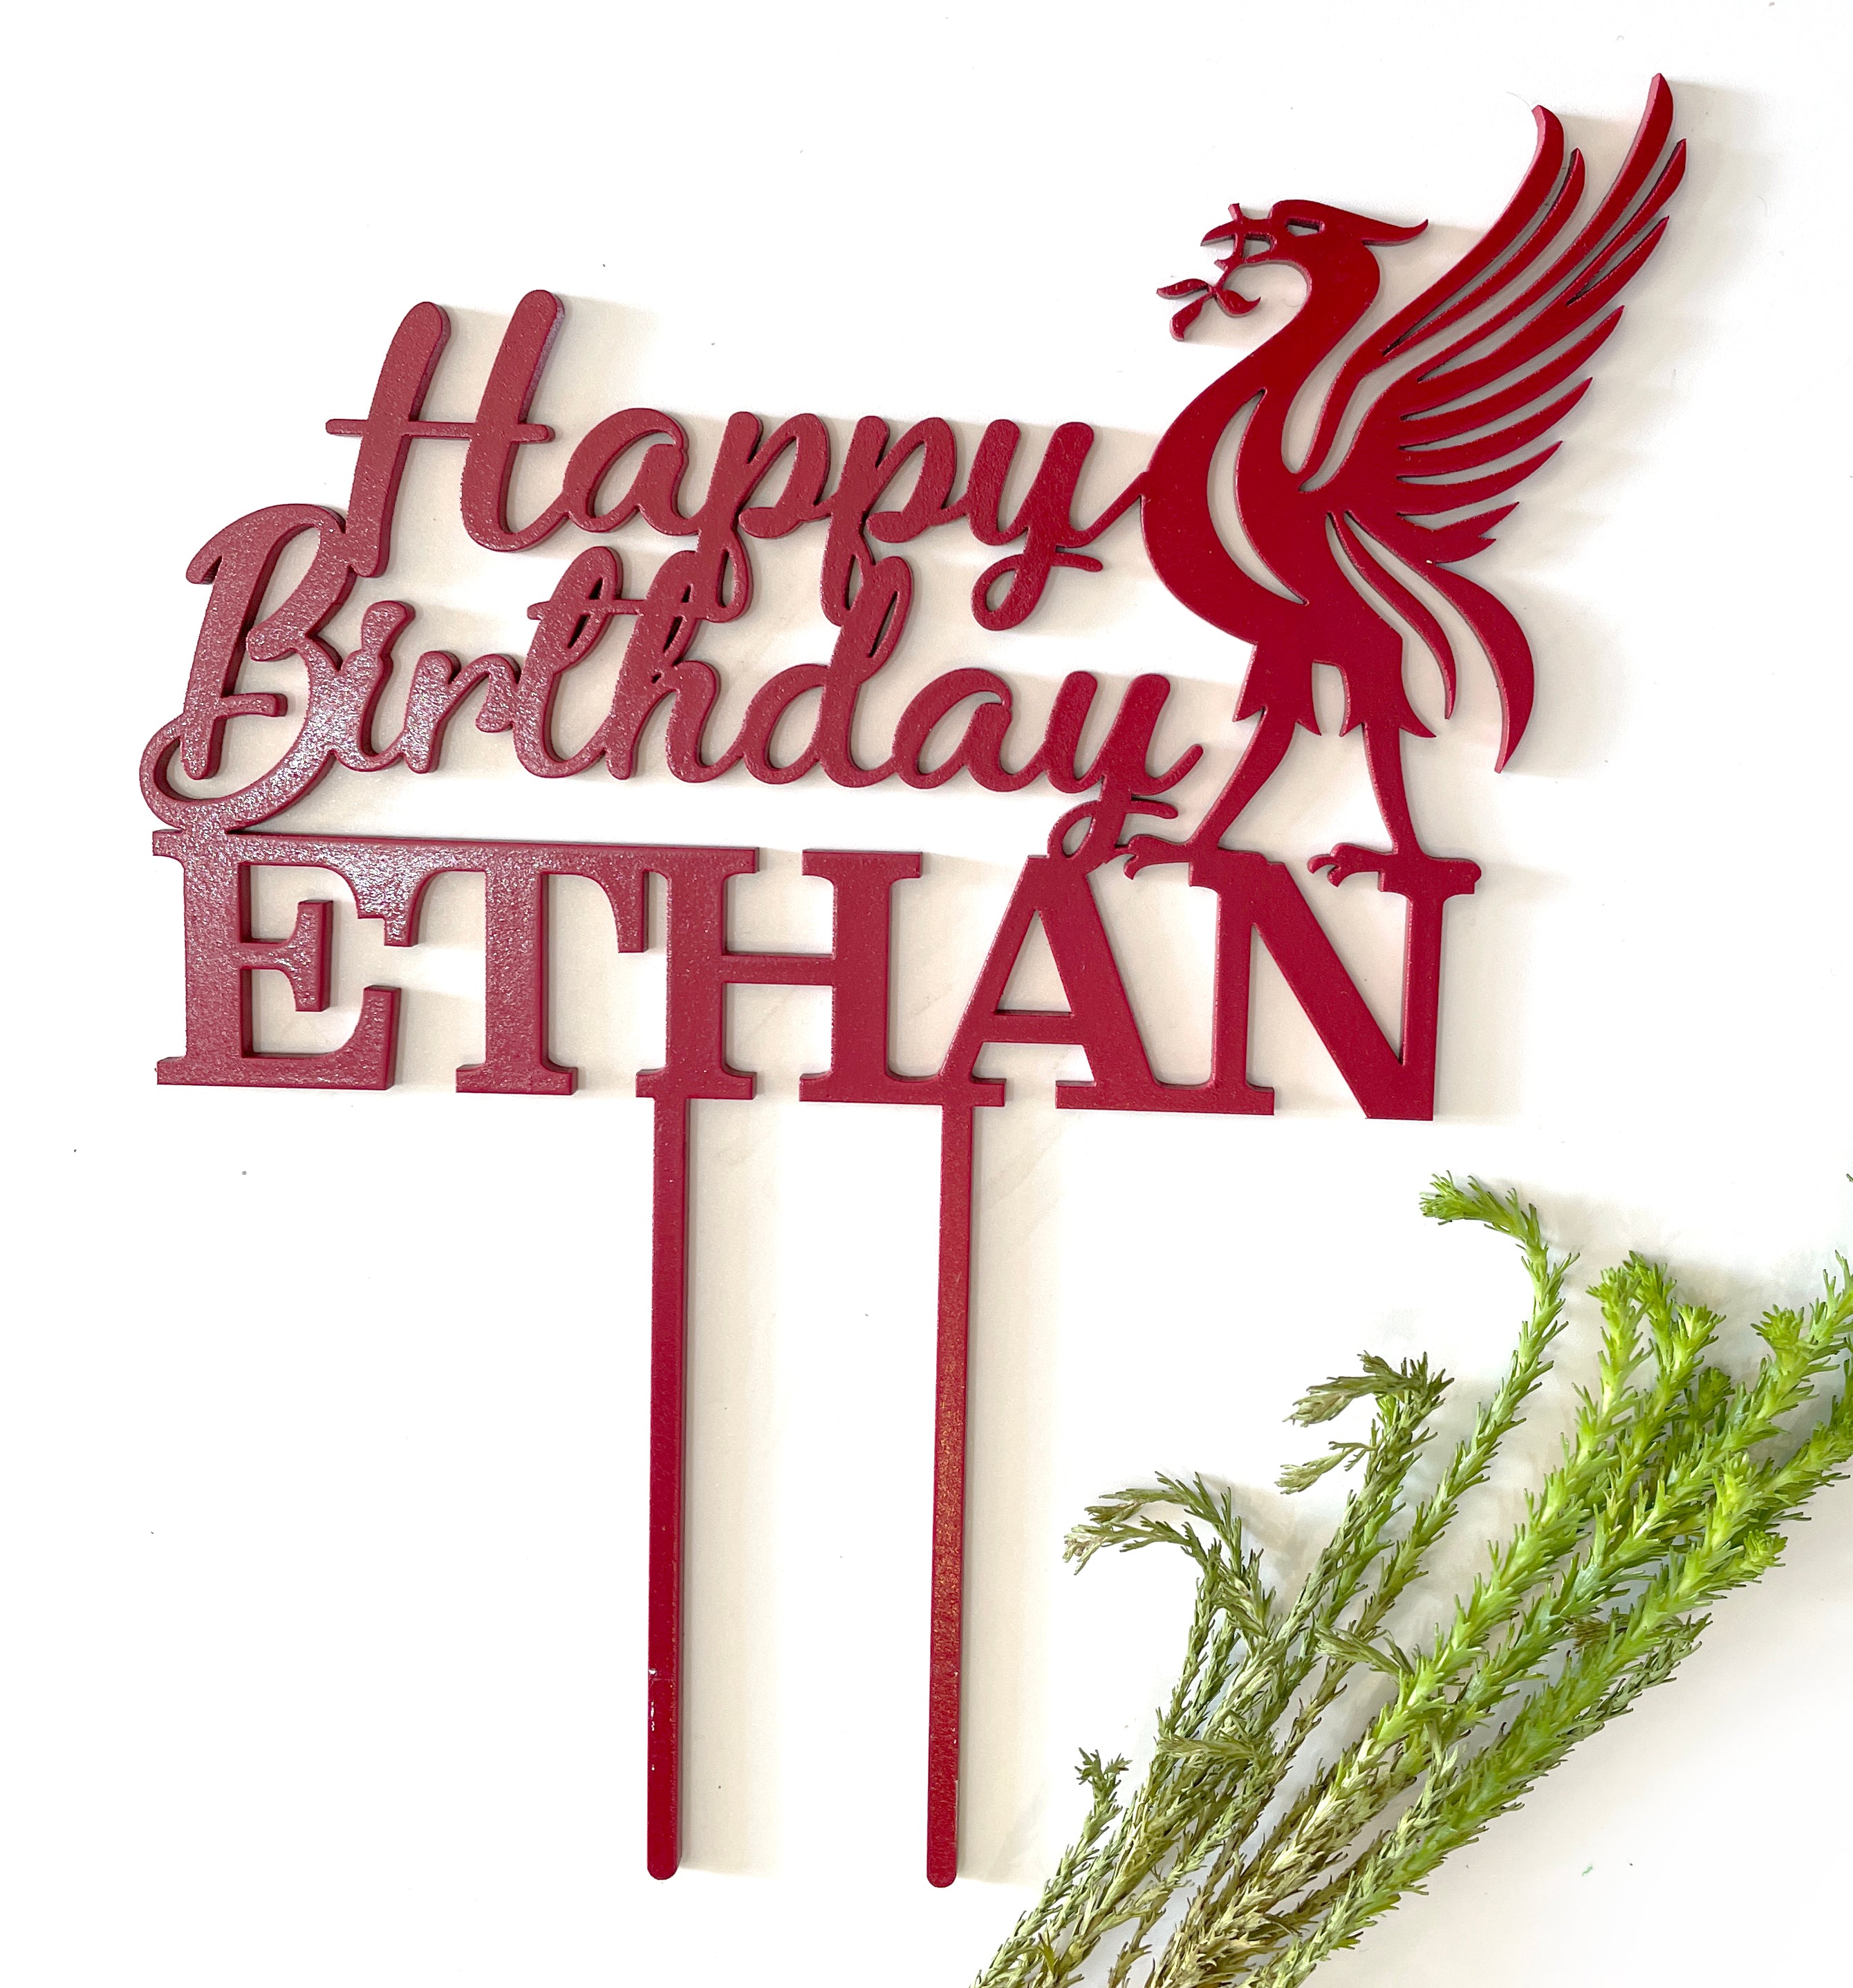 3D CAKE TOPPERS personalized Man United Liverpool American Football £4.00 -  PicClick UK